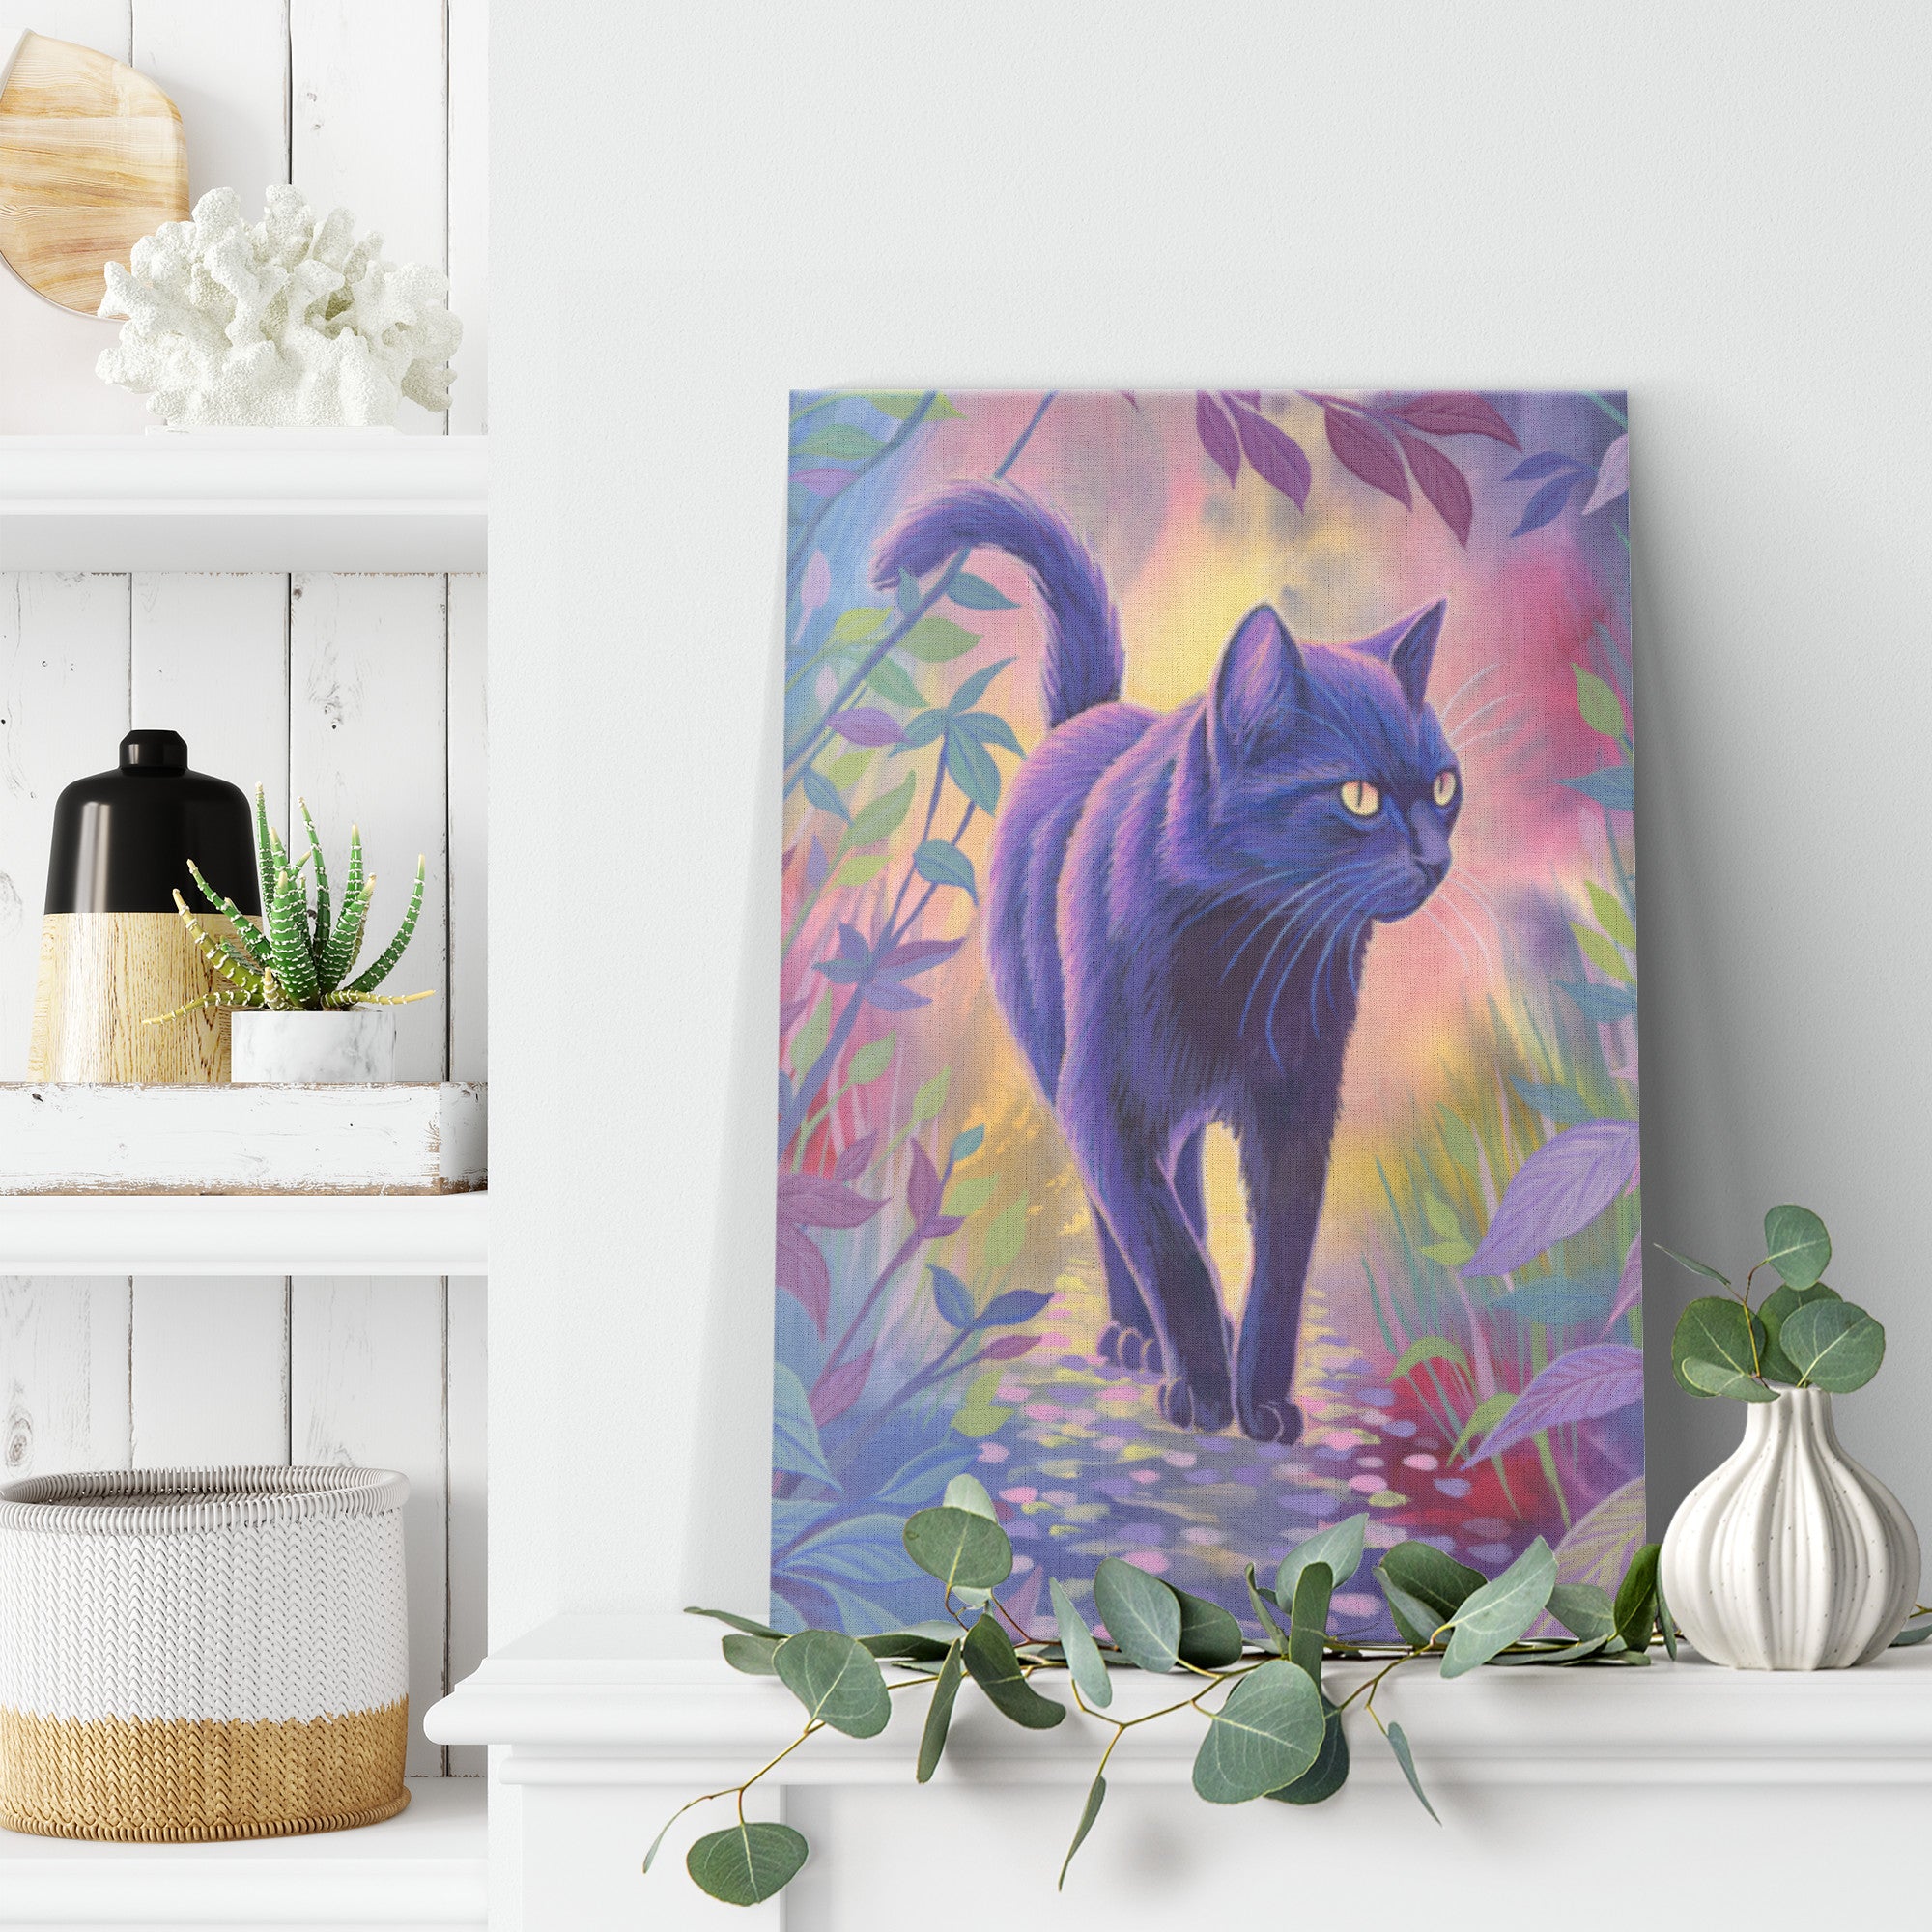 A Canvas art Print of a blue cat with glowing yellow eyes, poised on a colorful, leaf-strewn path, displayed on a shelf with plants and decor.